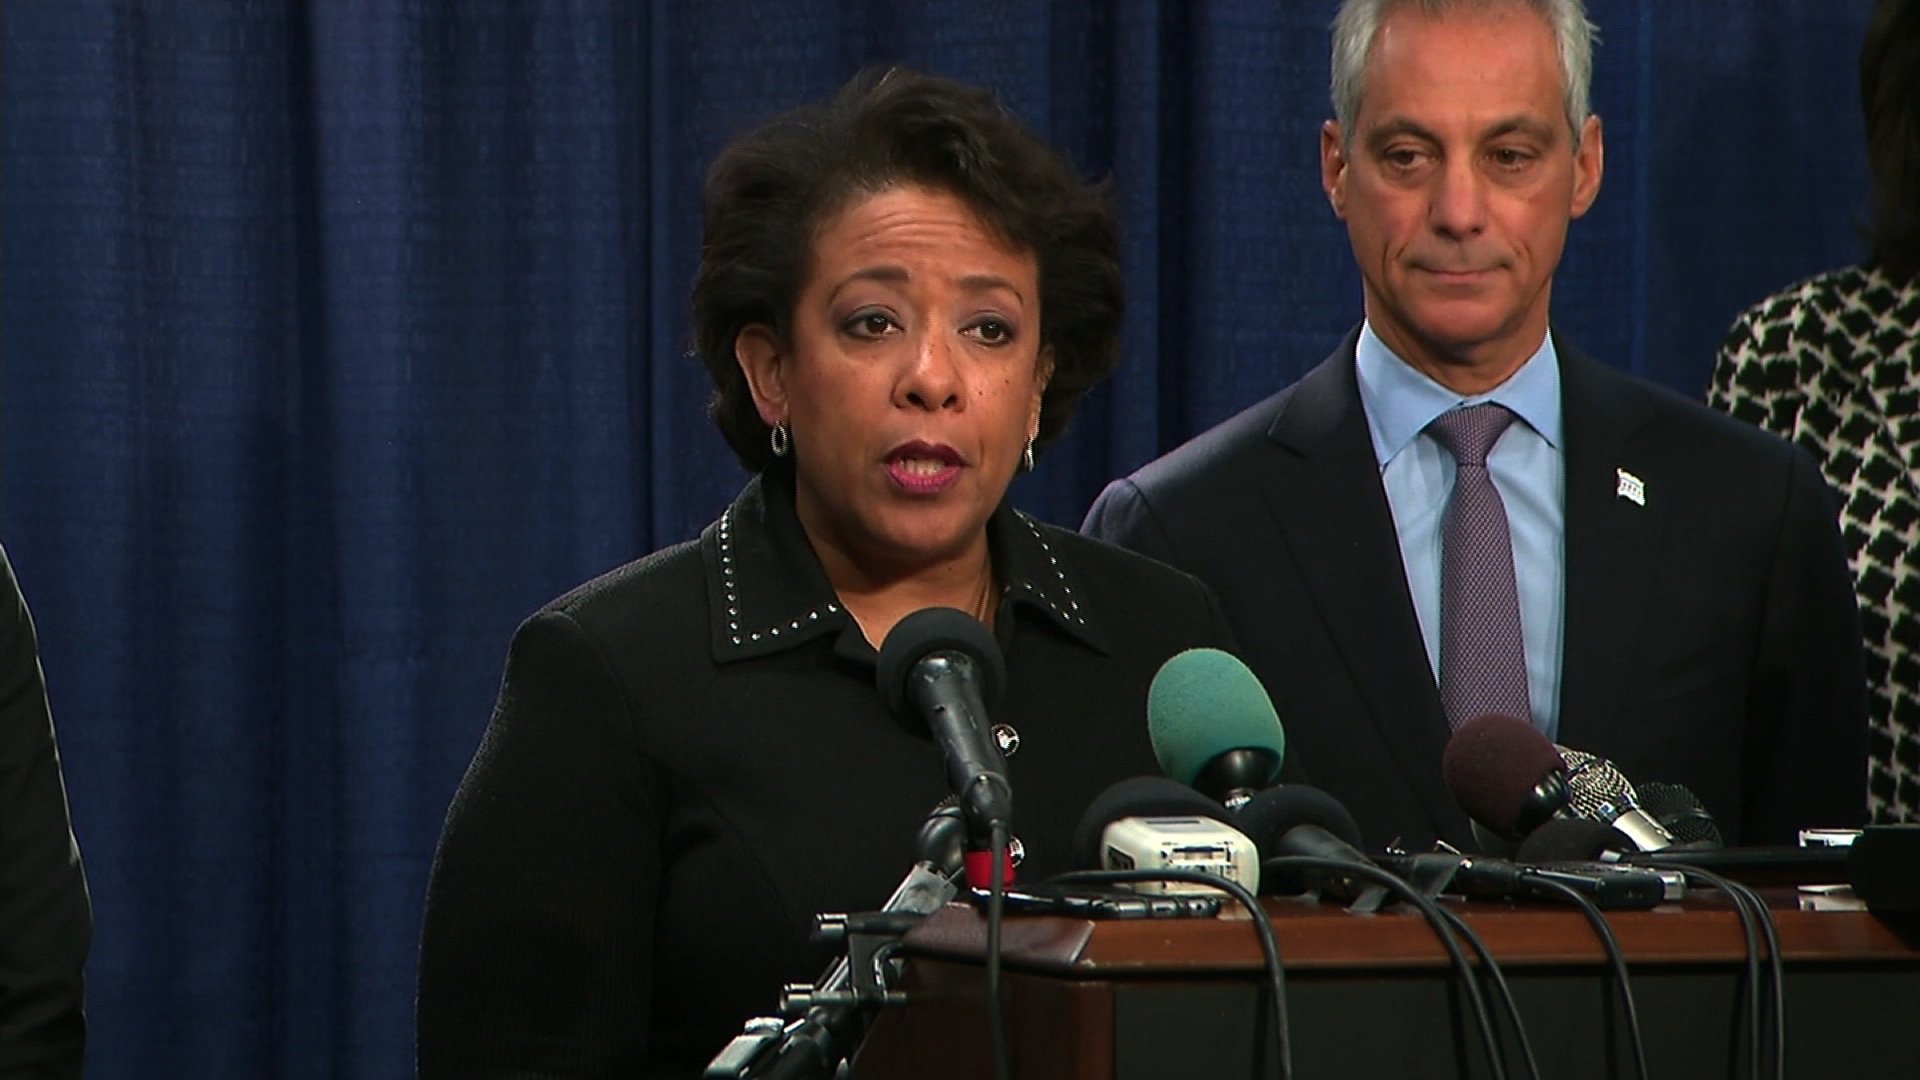 There is reasonable cause to believe that the Chicago Police Department engages in a pattern of excessive force, US Attorney General Loretta Lynch said in Chicago Friday, citing a 13-month Department of Justice investigation. (229657)